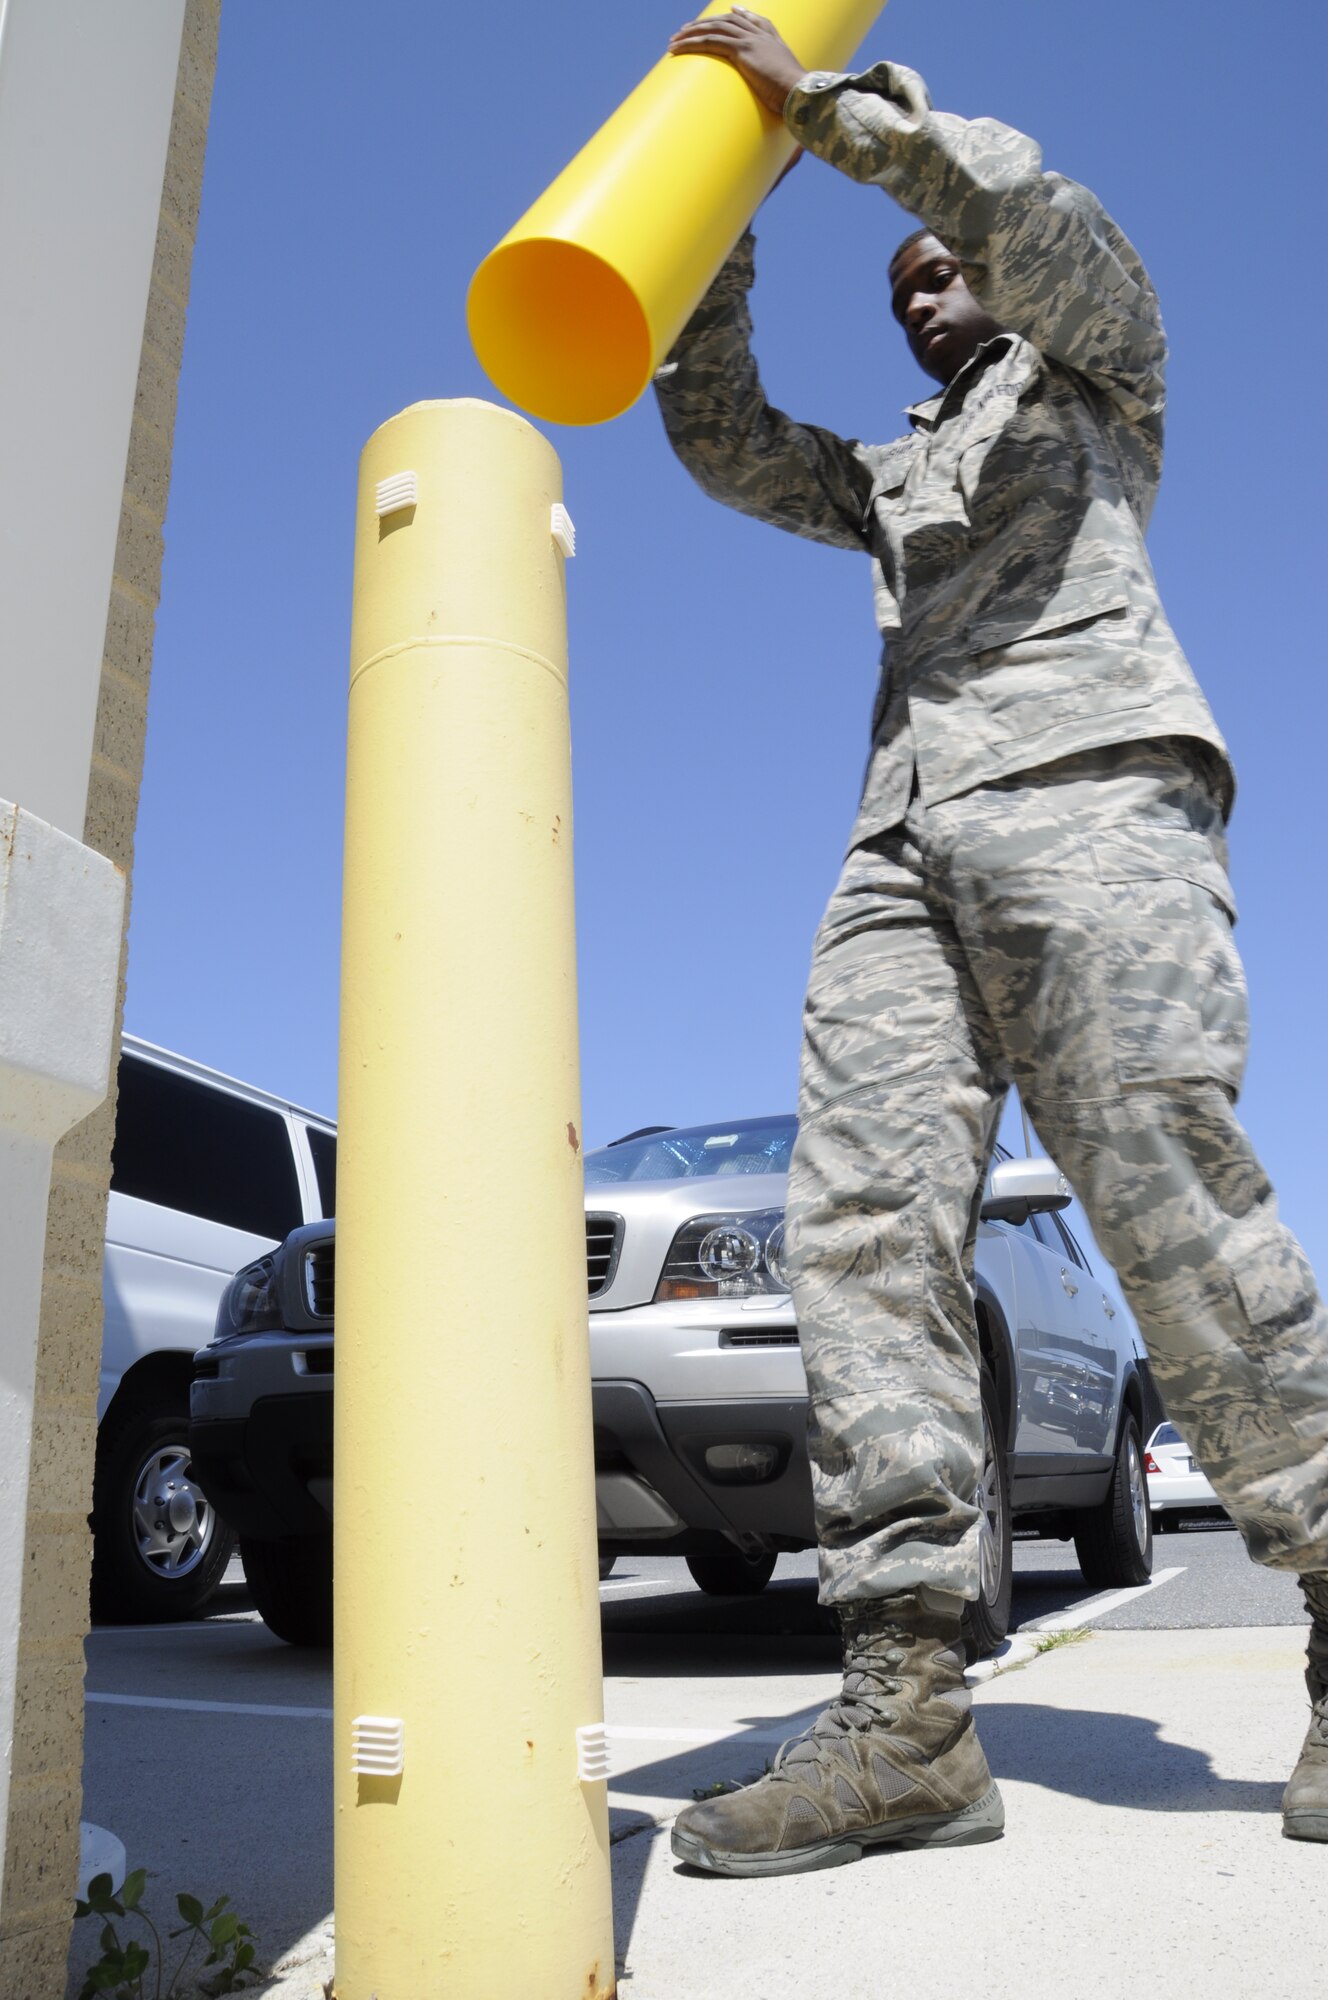 Senior Airman Christian Habersham puts a safety yellow pole sleeve on an existing safety pole outside the Charles C. Carson Center for Mortuary Affairs, Dover Air Force Base, Del., Aug. 25, 2014. The sleeve is one of many measures Air Force Mortuary Affairs Operations has implemented to enhance safety. Habersham is deployed to the mortuary from the 459th Force Support Squadron, Joint Base Andrews, Md. (U.S. Air Force photo Staff Sgt. Lucas Morrow)